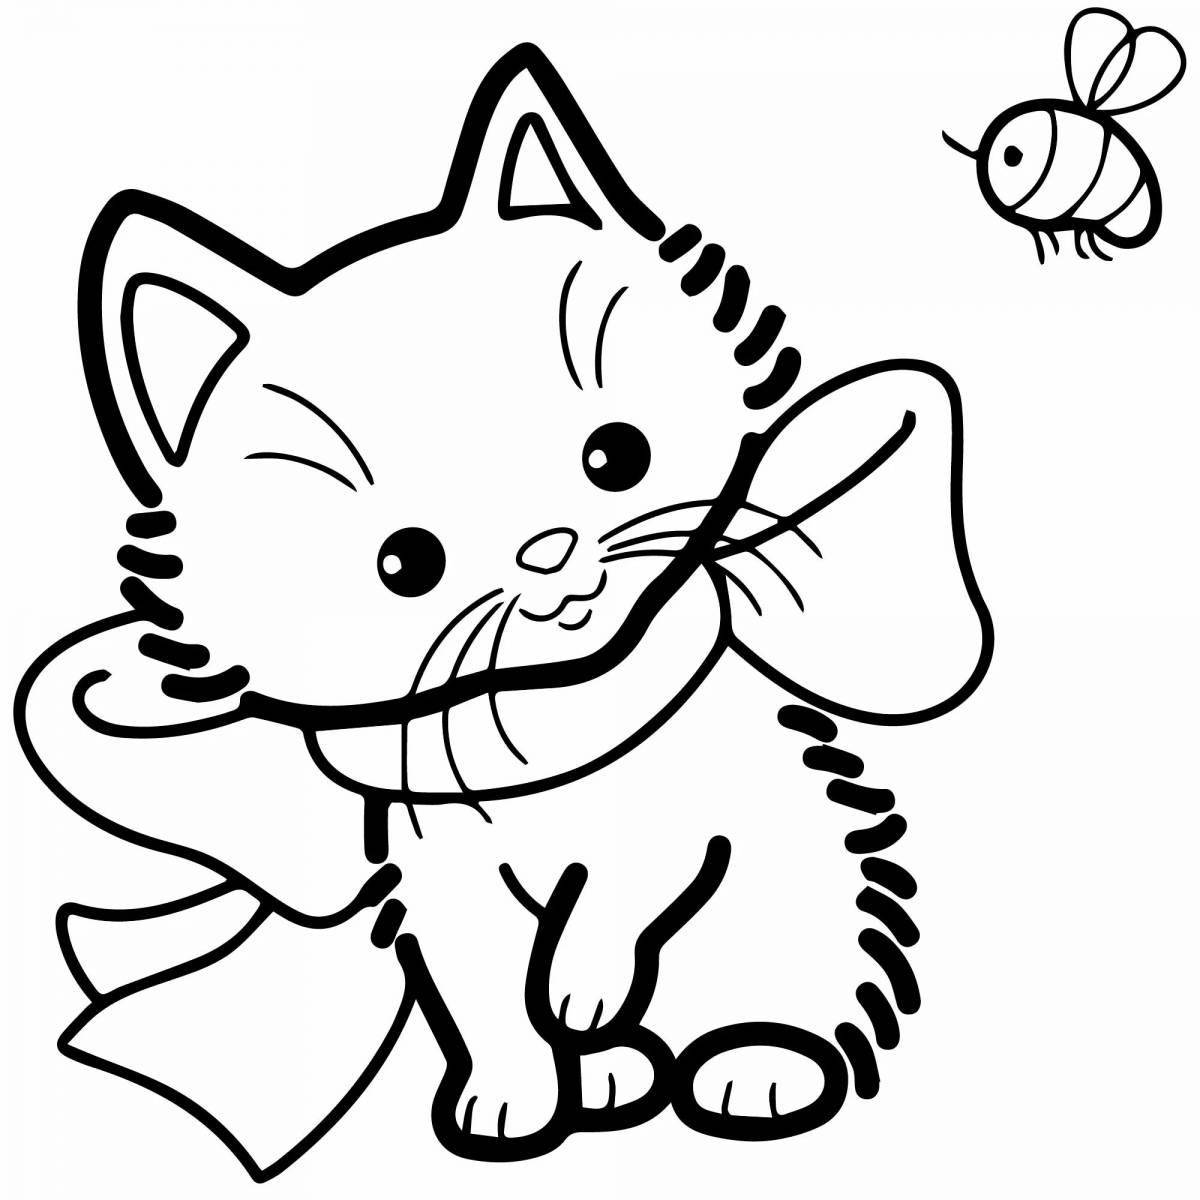 Adorable little cat coloring page